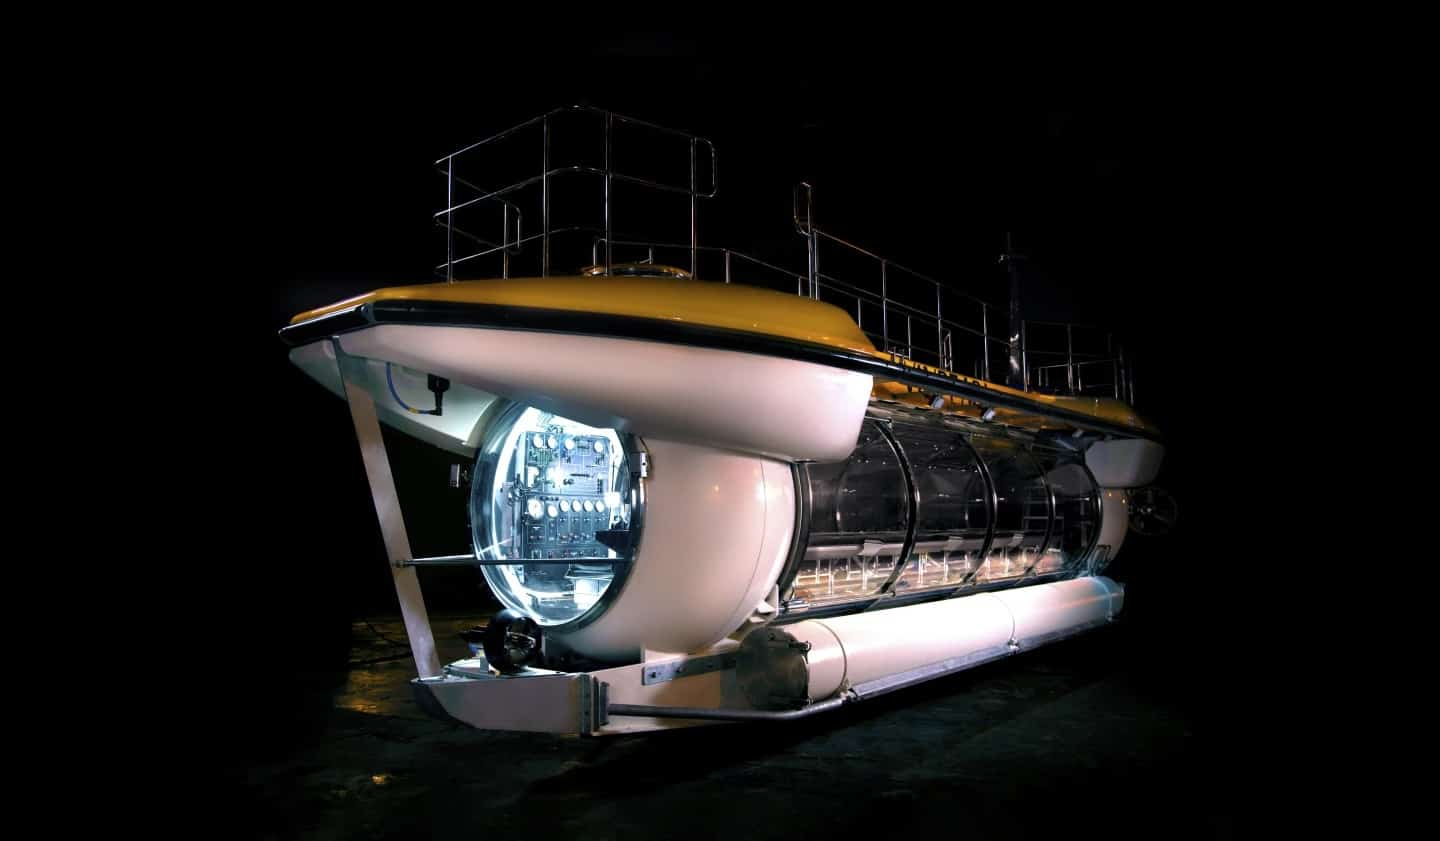 Triton’s DeepView 24 is Perfect for Some Underwater Exploration